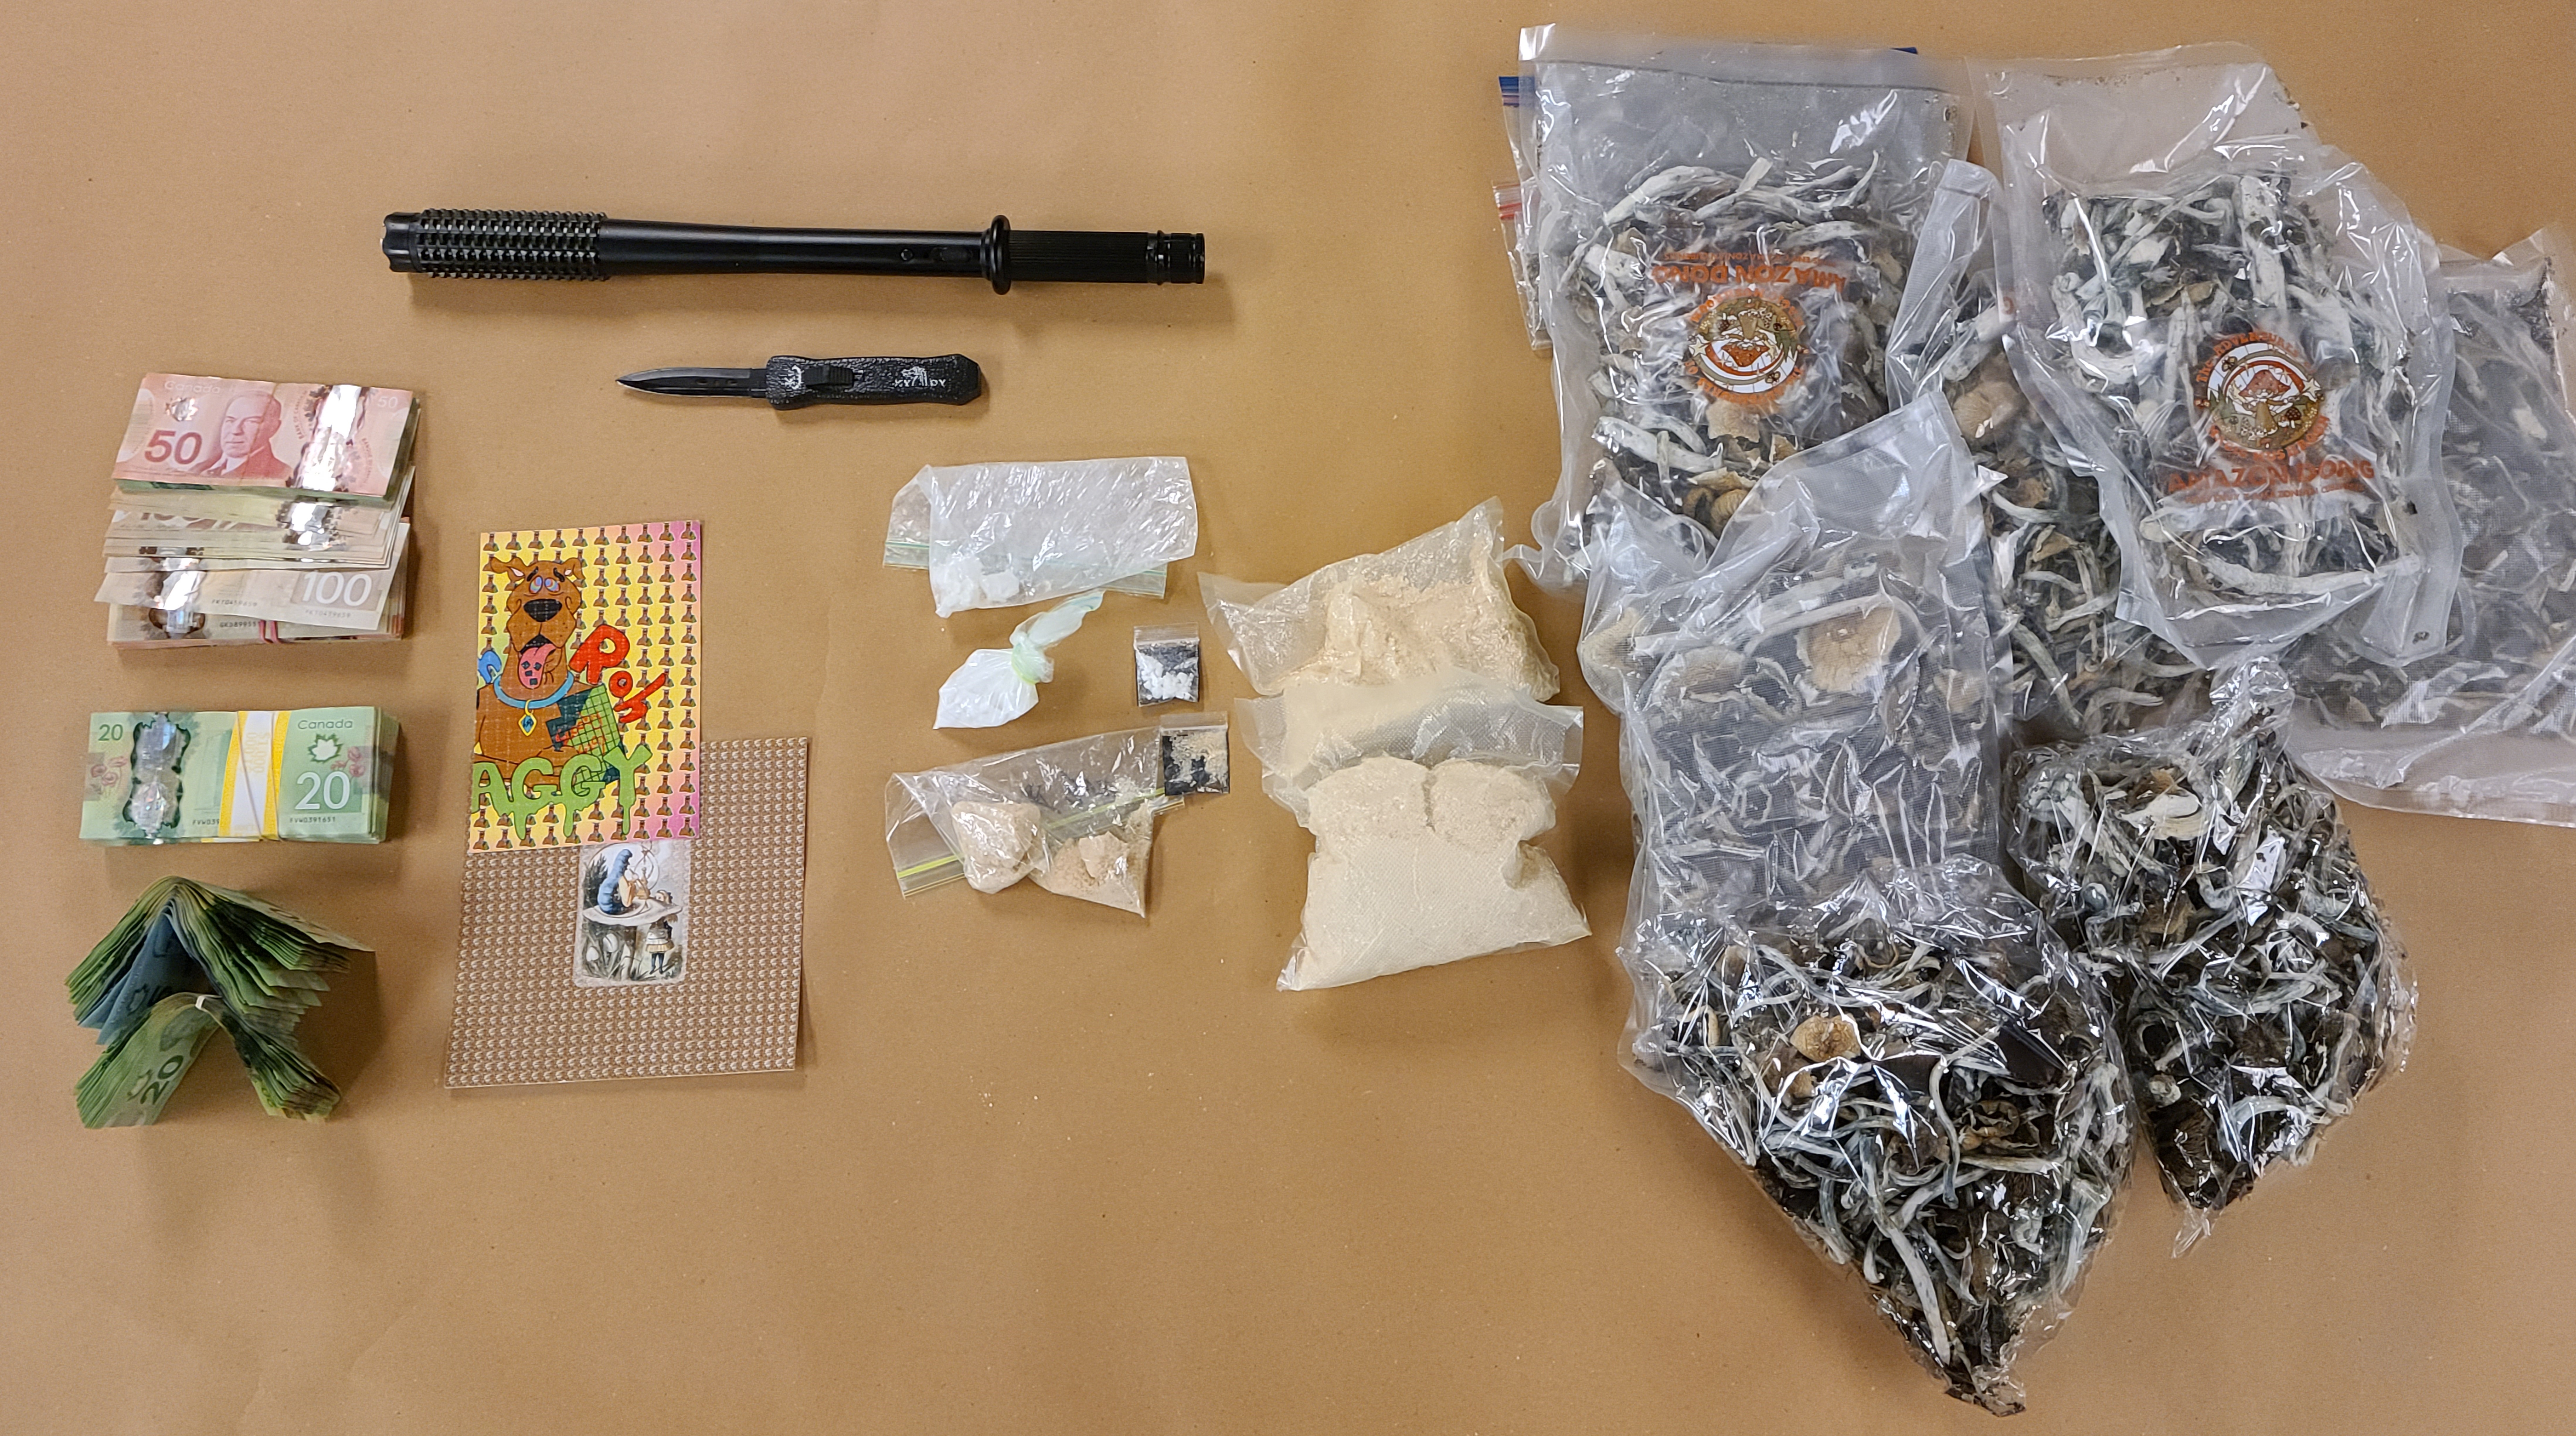 Image of seized items